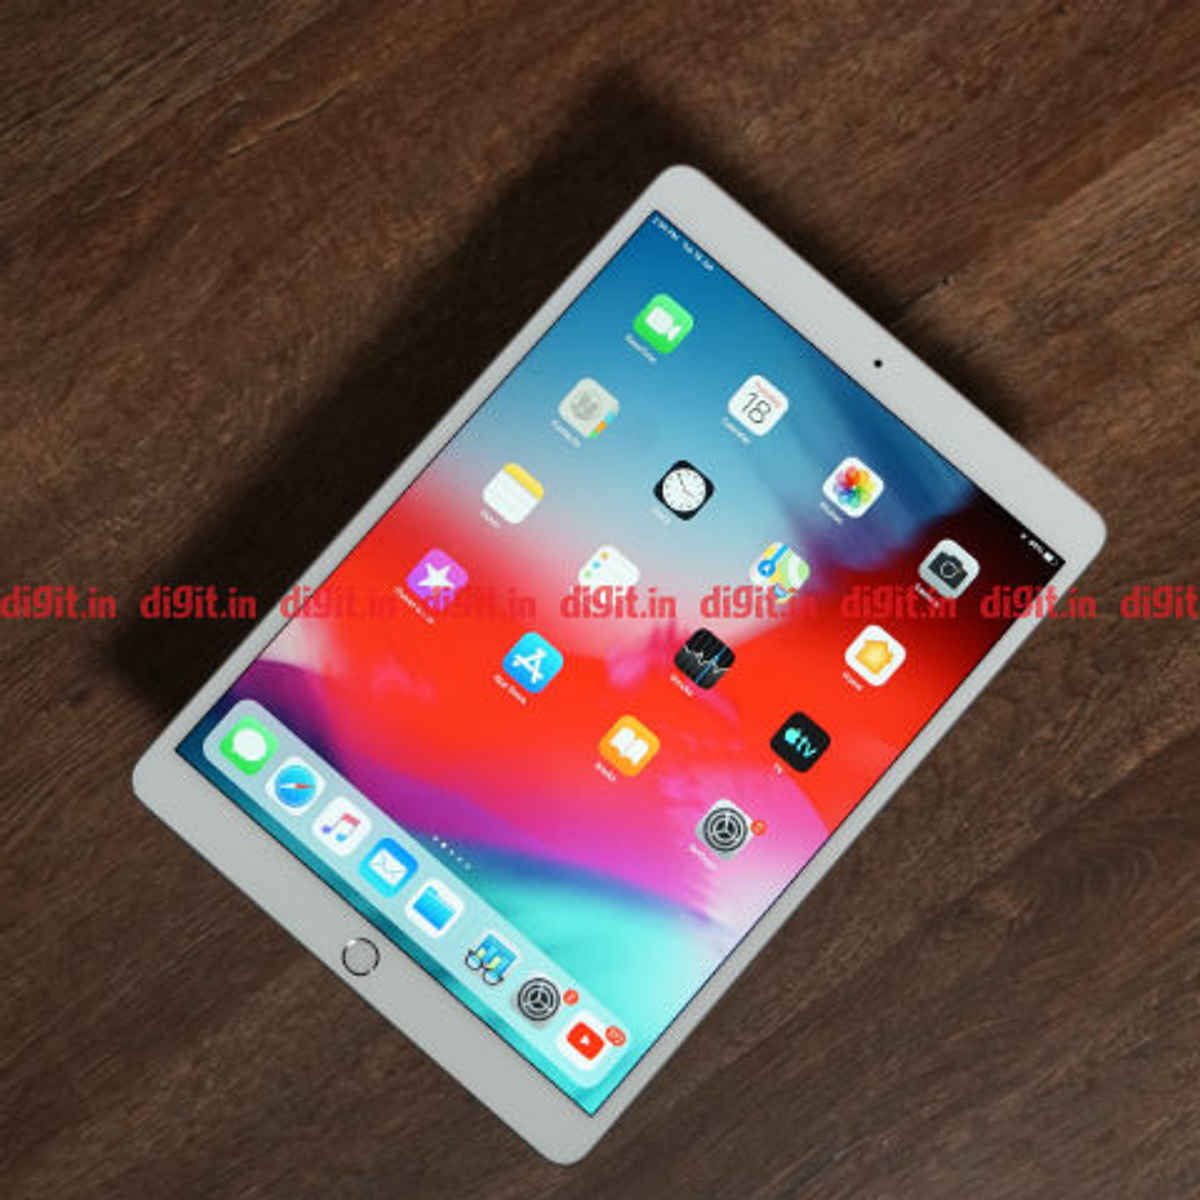 Apple iPad Air (2019) Review: Is the 2019 10.5-inch iPad Air the right iPad for you?